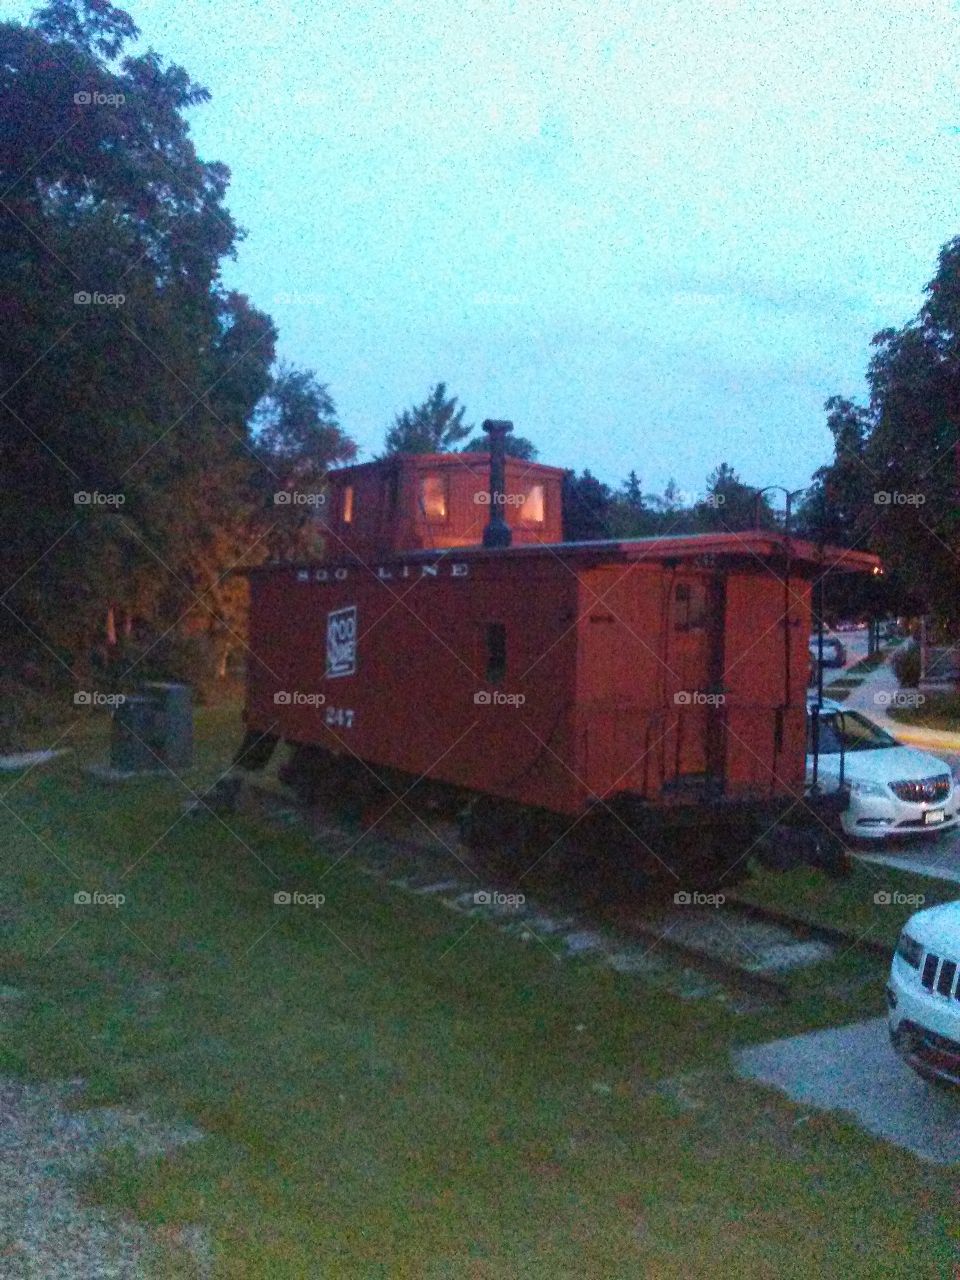 Old Soo Line caboose next to the Elkhart Lake depot.